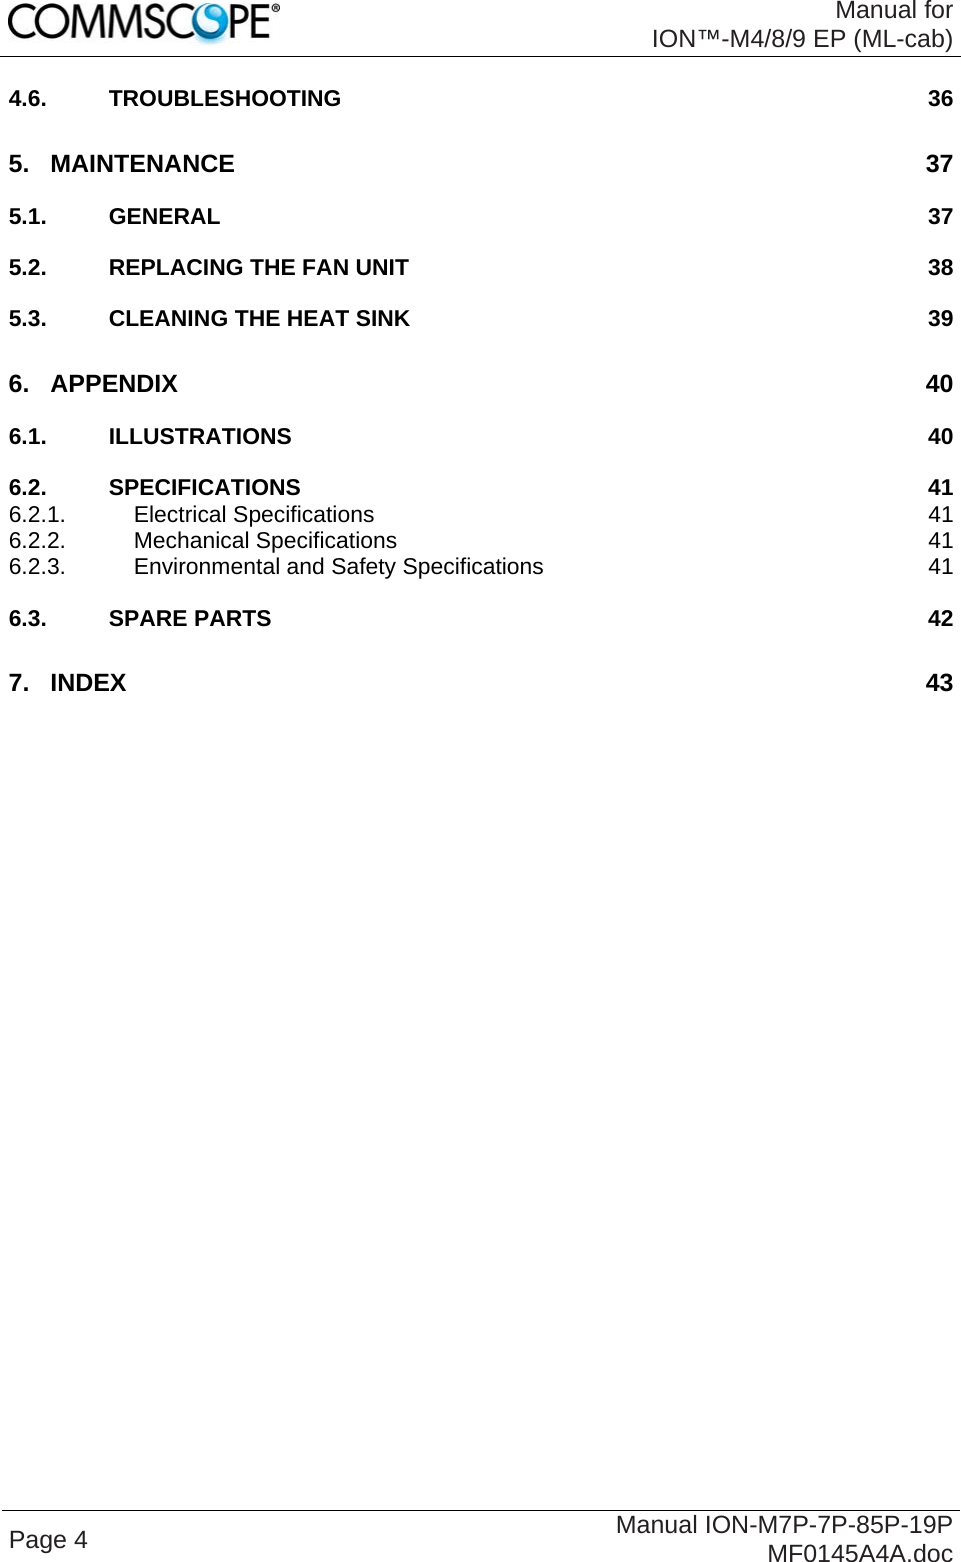  Manual for ION™-M4/8/9 EP (ML-cab) Page 4  Manual ION-M7P-7P-85P-19P MF0145A4A.doc 4.6. TROUBLESHOOTING 36 5. MAINTENANCE 37 5.1. GENERAL 37 5.2. REPLACING THE FAN UNIT 38 5.3. CLEANING THE HEAT SINK 39 6. APPENDIX 40 6.1. ILLUSTRATIONS 40 6.2. SPECIFICATIONS 41 6.2.1. Electrical Specifications 41 6.2.2. Mechanical Specifications 41 6.2.3. Environmental and Safety Specifications 41 6.3. SPARE PARTS 42 7. INDEX 43  